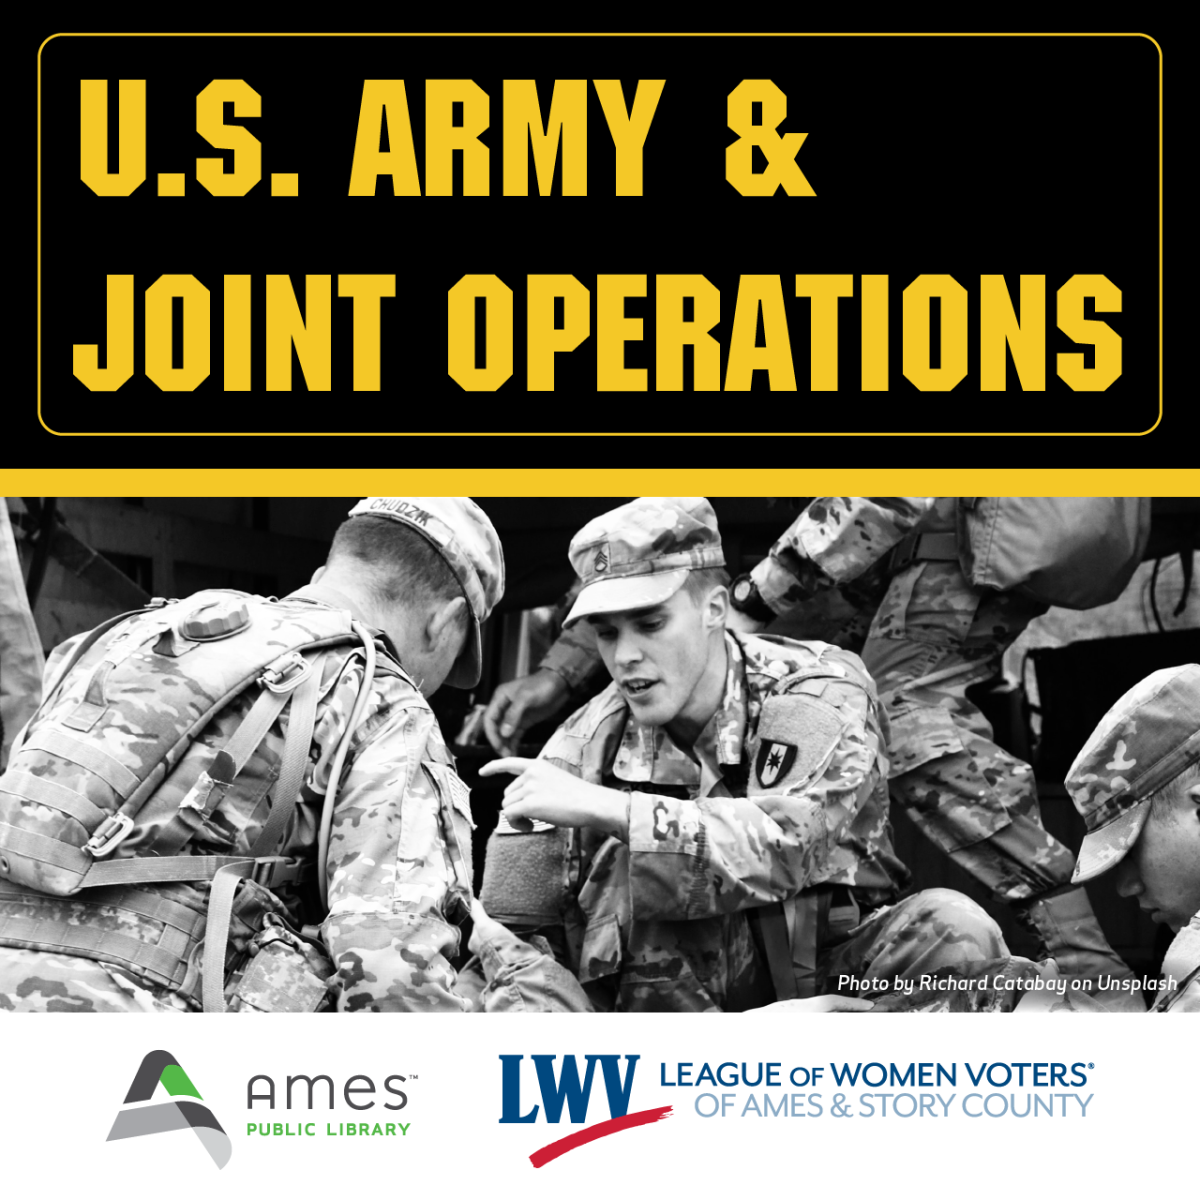 U.S. Army & Joint Operations